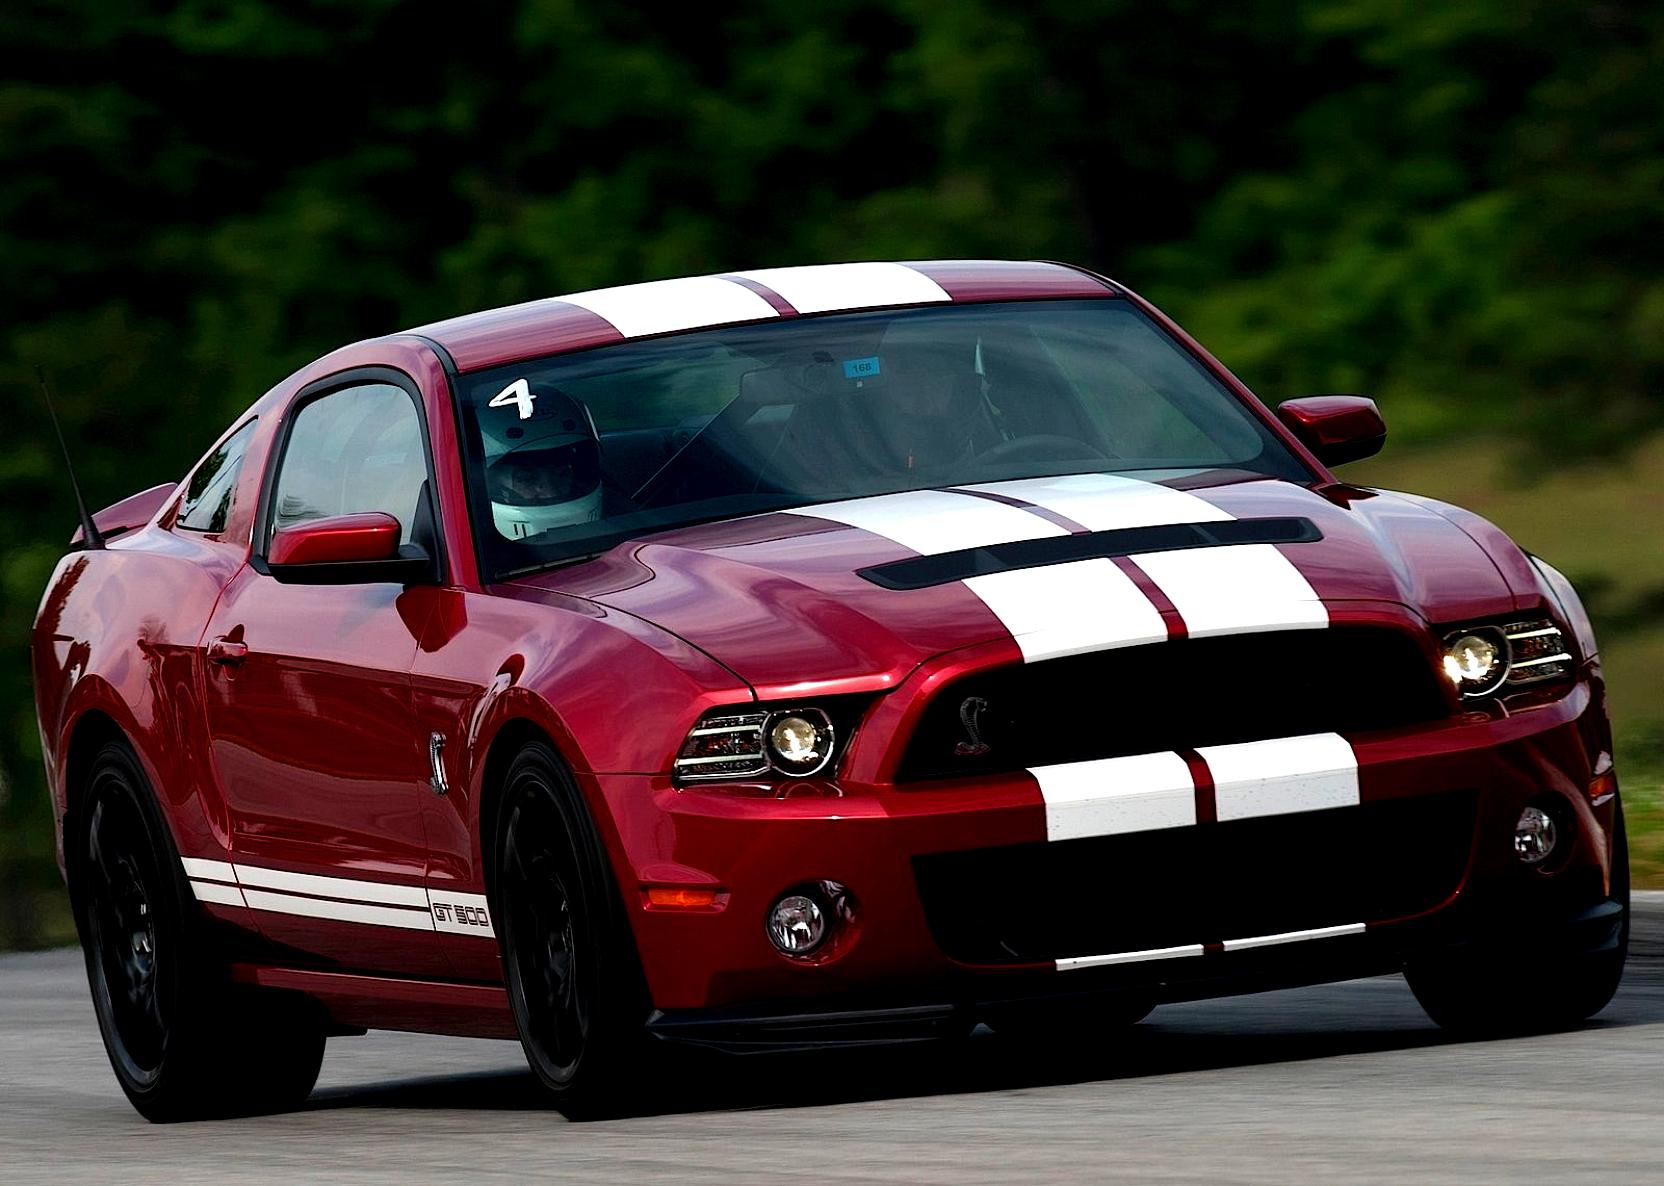 Ford Mustang Shelby GT500 2012 #4